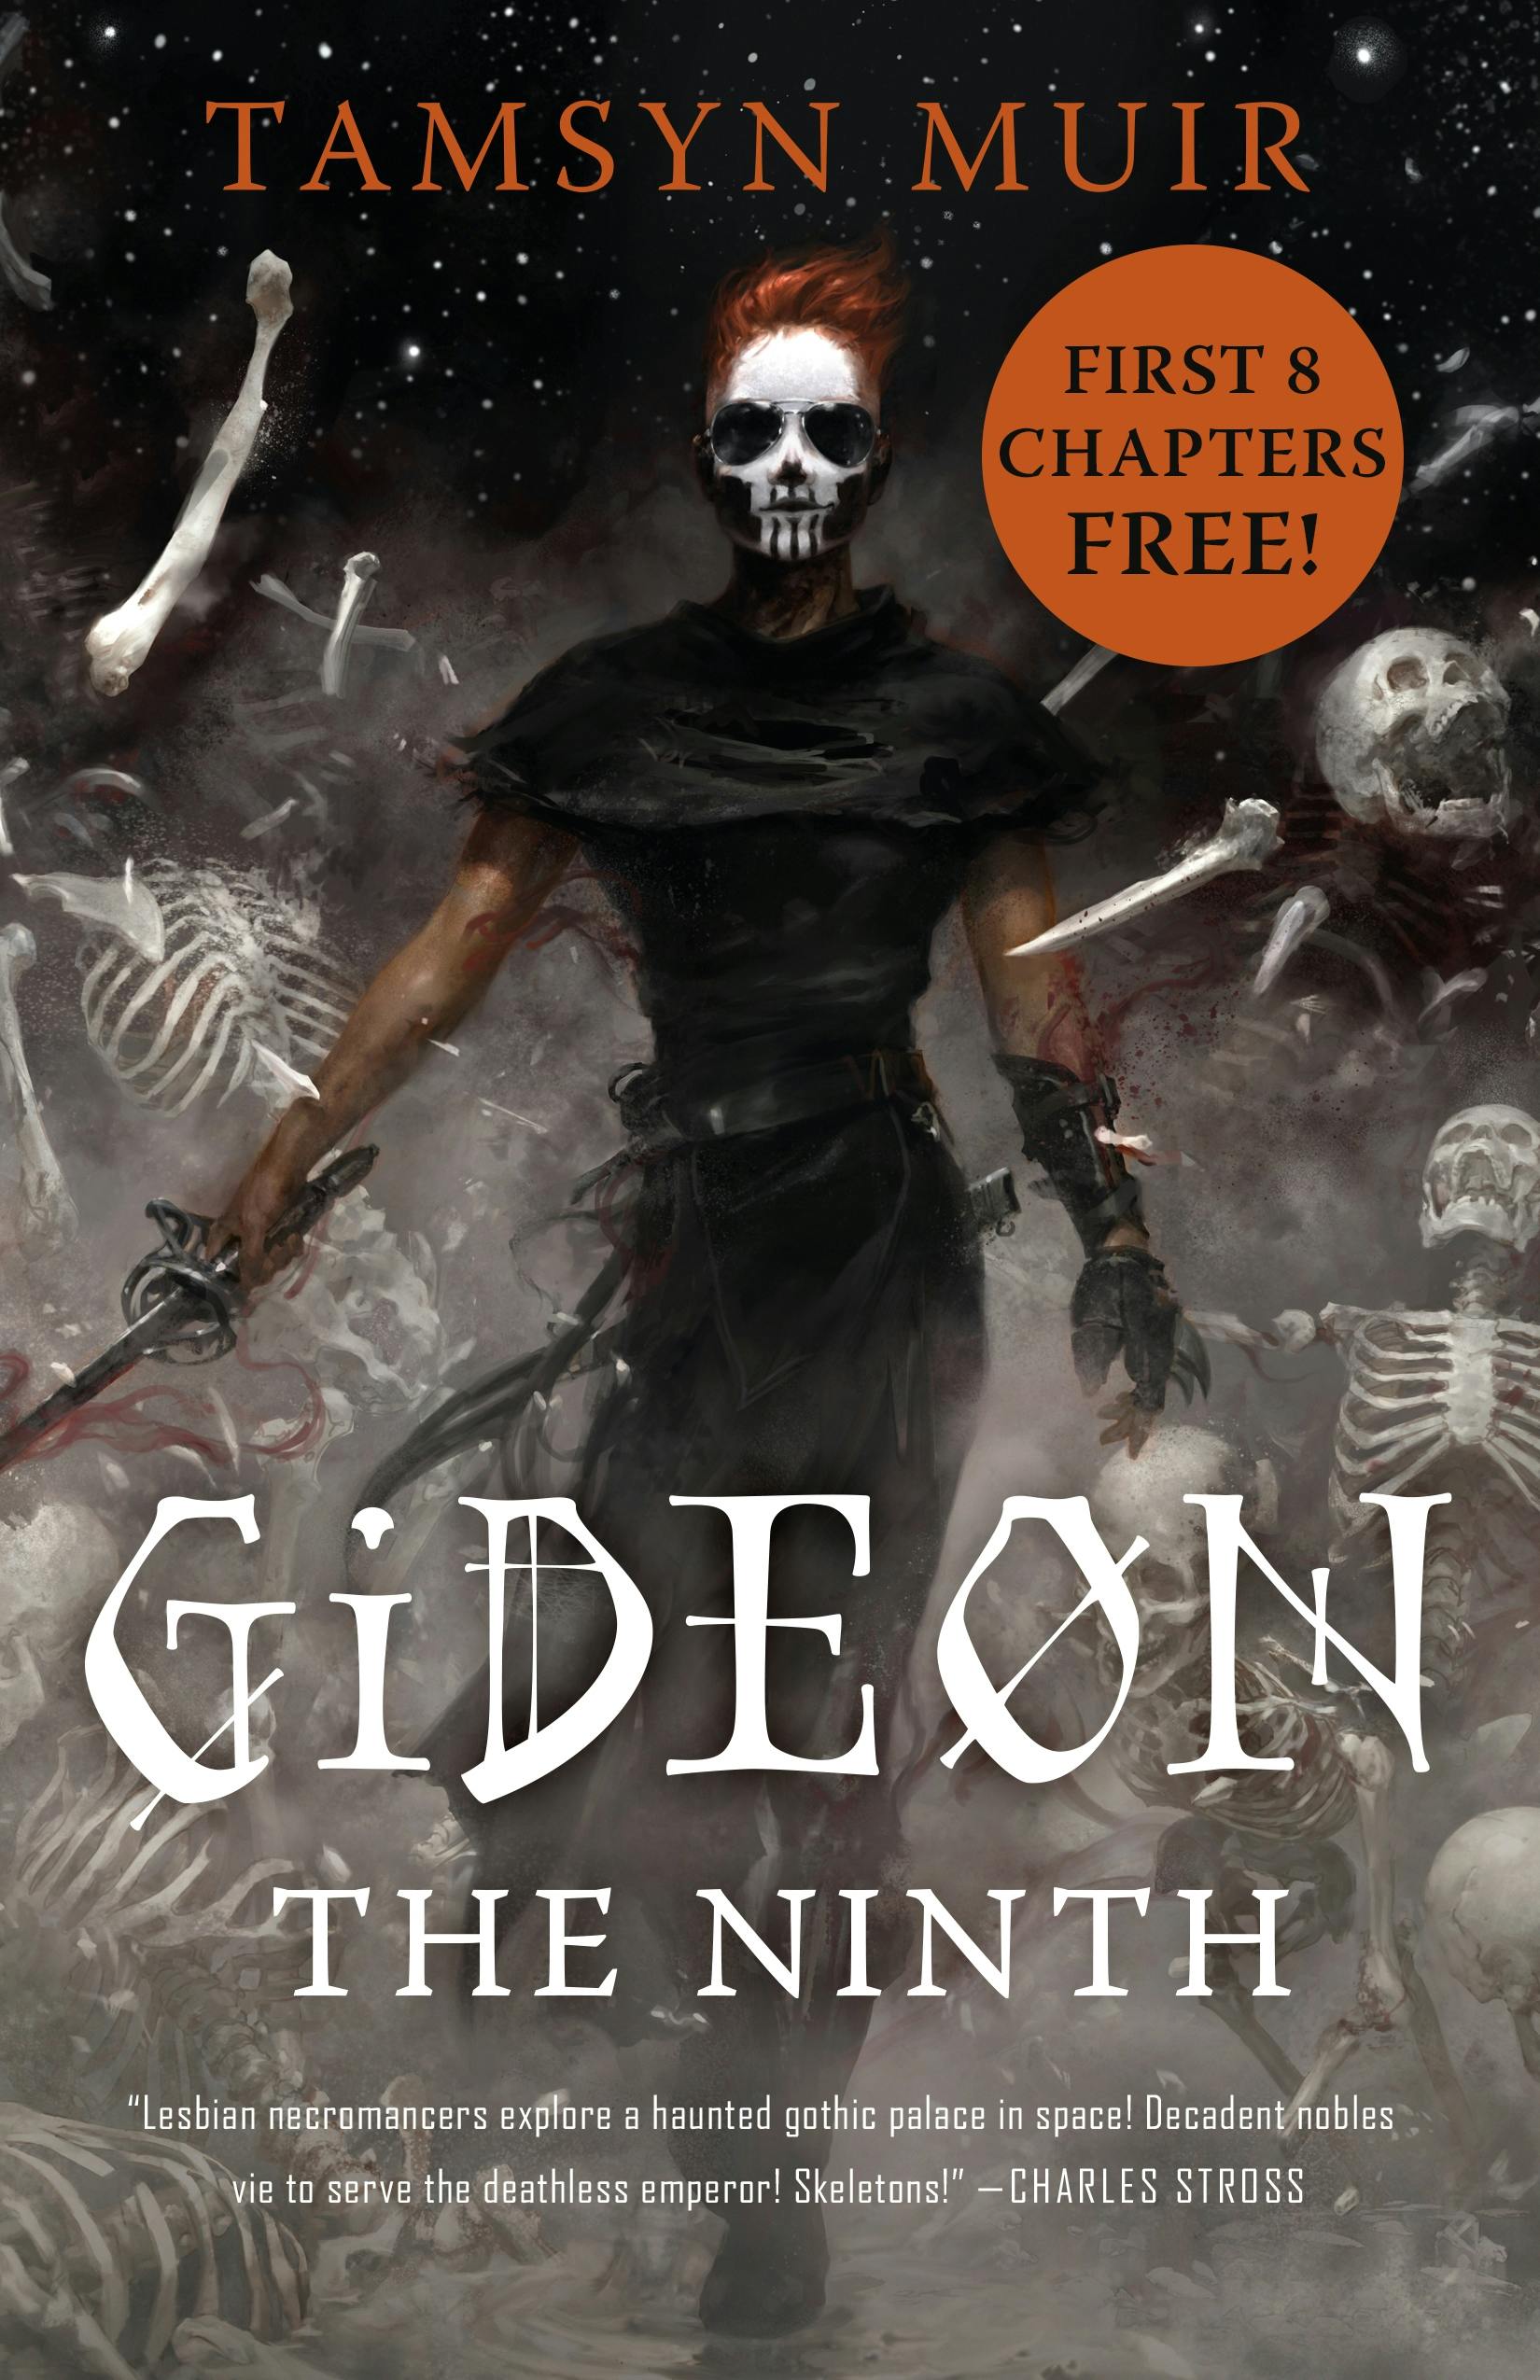 Cover for the book titled as: Gideon the Ninth: Act One